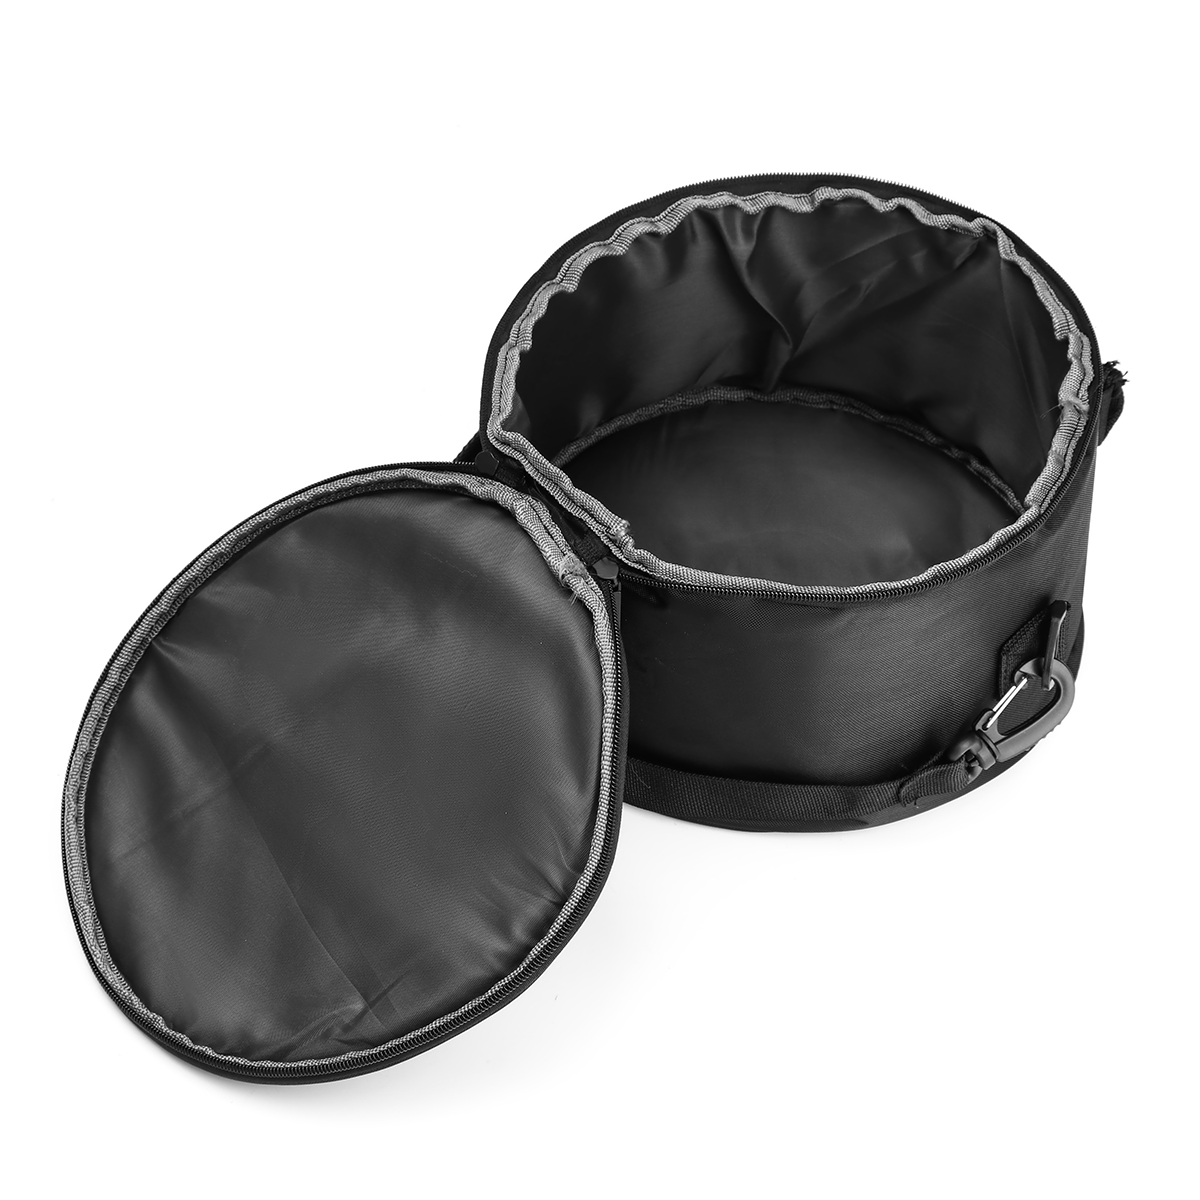 Steel-Tongue-Drum-Bag-Storage-Punch-Soulder-Crossbody-Bag-For-Outdoor-Camping-Leisure-Wear-1357124-6